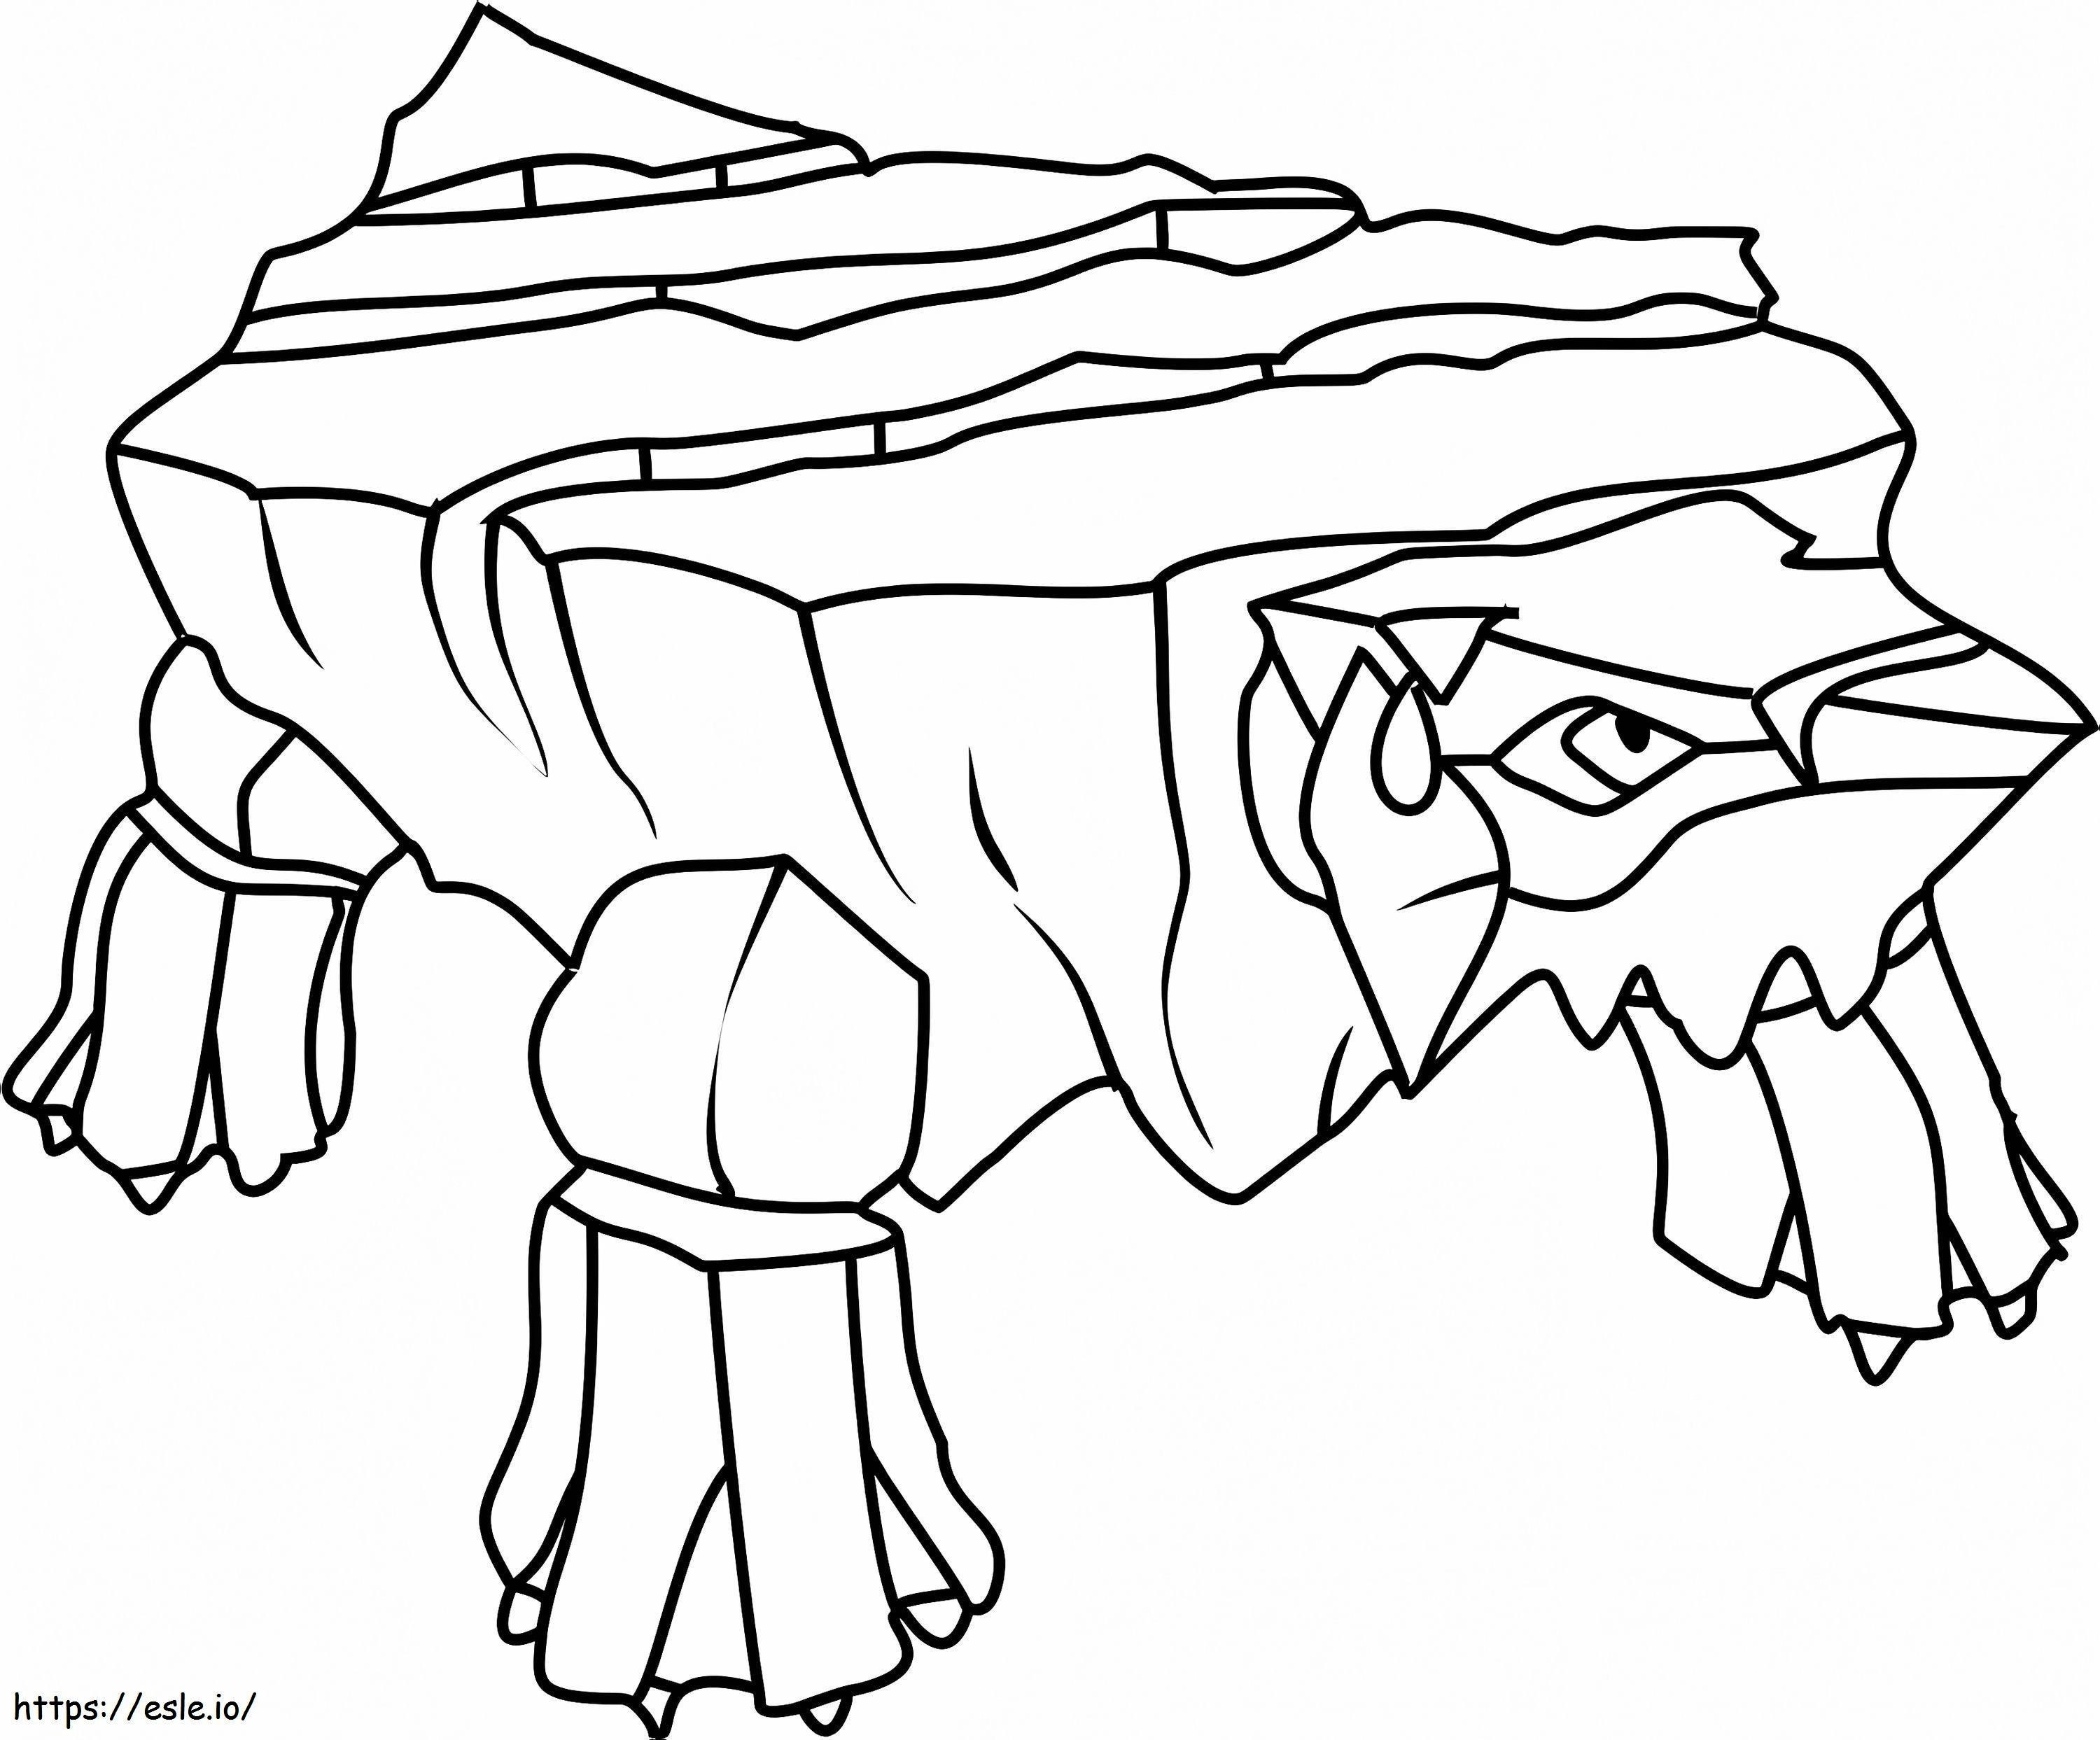 1530327192 Avalugg Pokemon1 coloring page